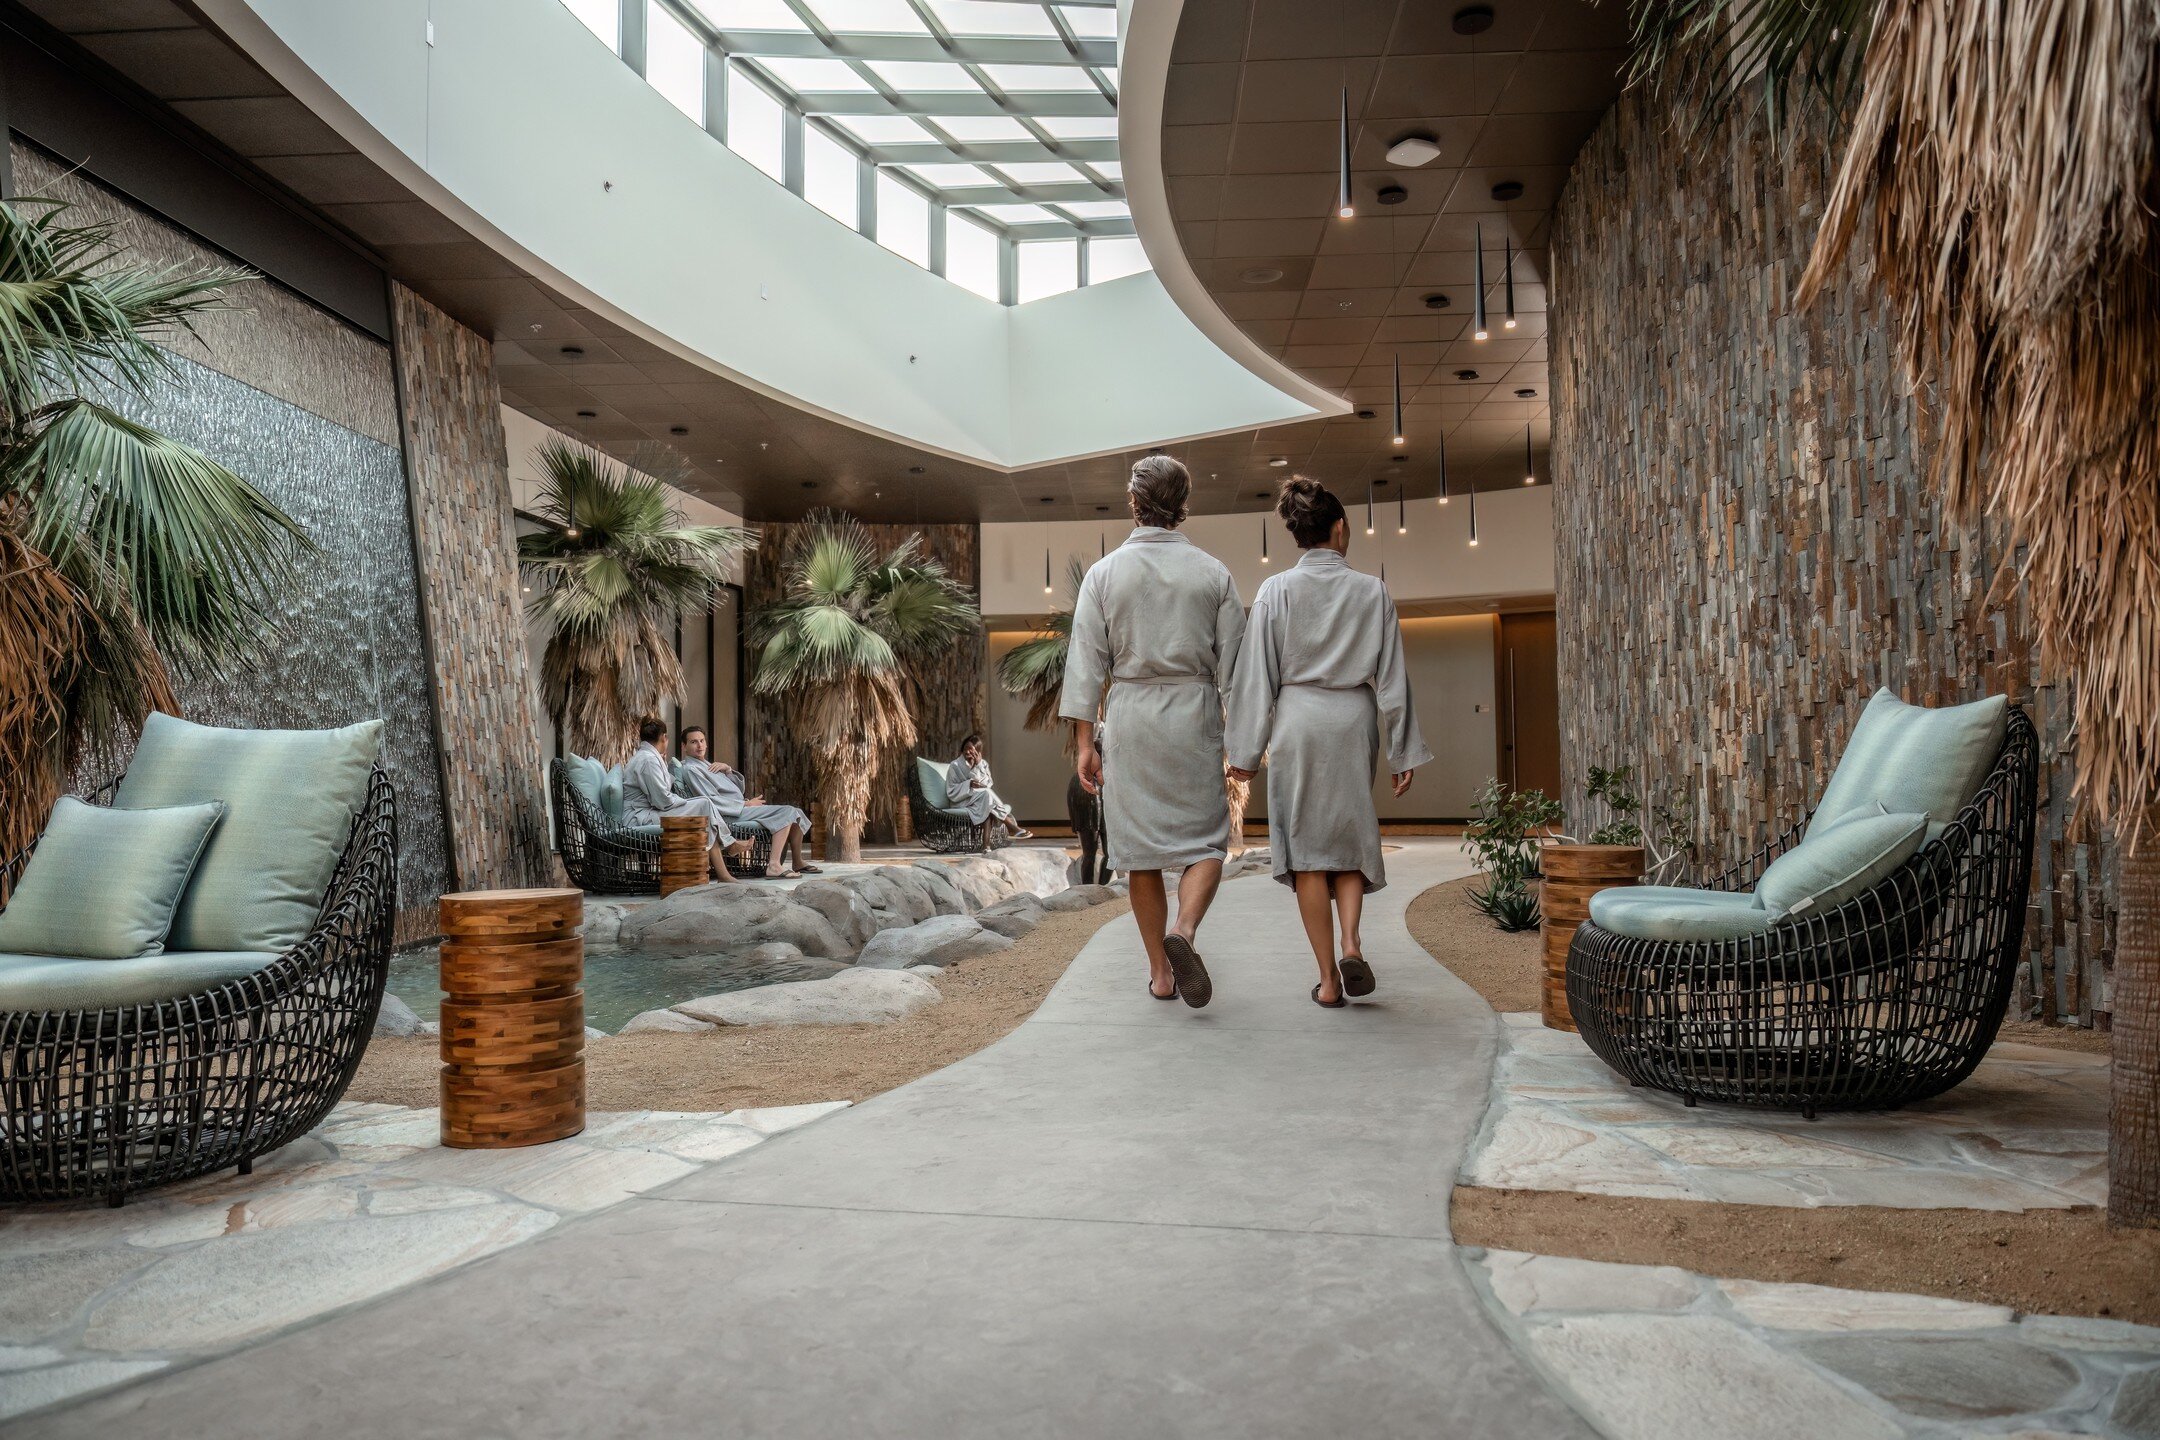 Named the #1 Spa in North America by @spasofamerica, The Spa at S&eacute;c-he in downtown Palm Springs is a one of a kind wellness destination unlike any other in the world. 

The 72,000 square foot indoor and outdoor state of the art spa features 22